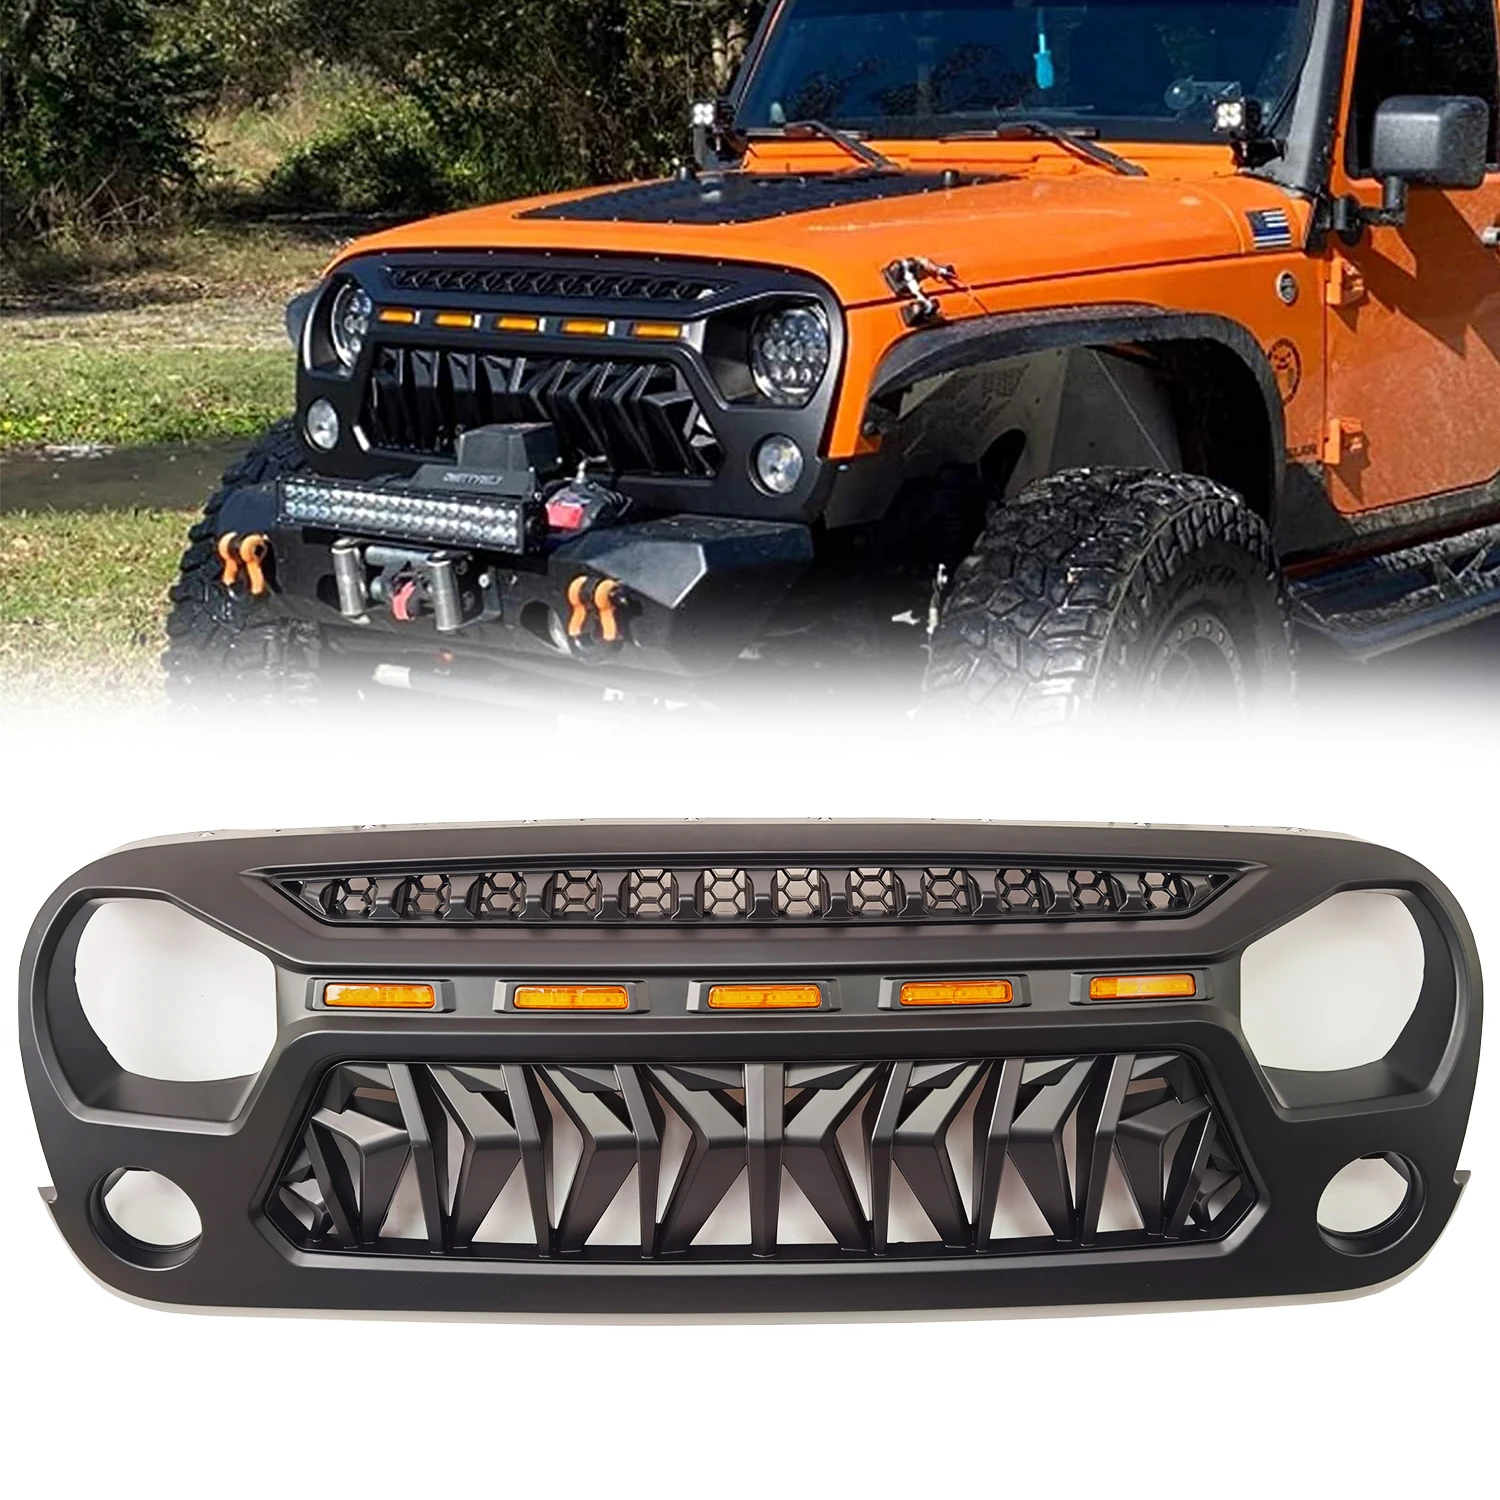 

SXMA J394 Grille Car Front Grill Mesh Racing Offroad Grilles With LED Light Exterior Decoration For Jeep Wrangler JK 07+